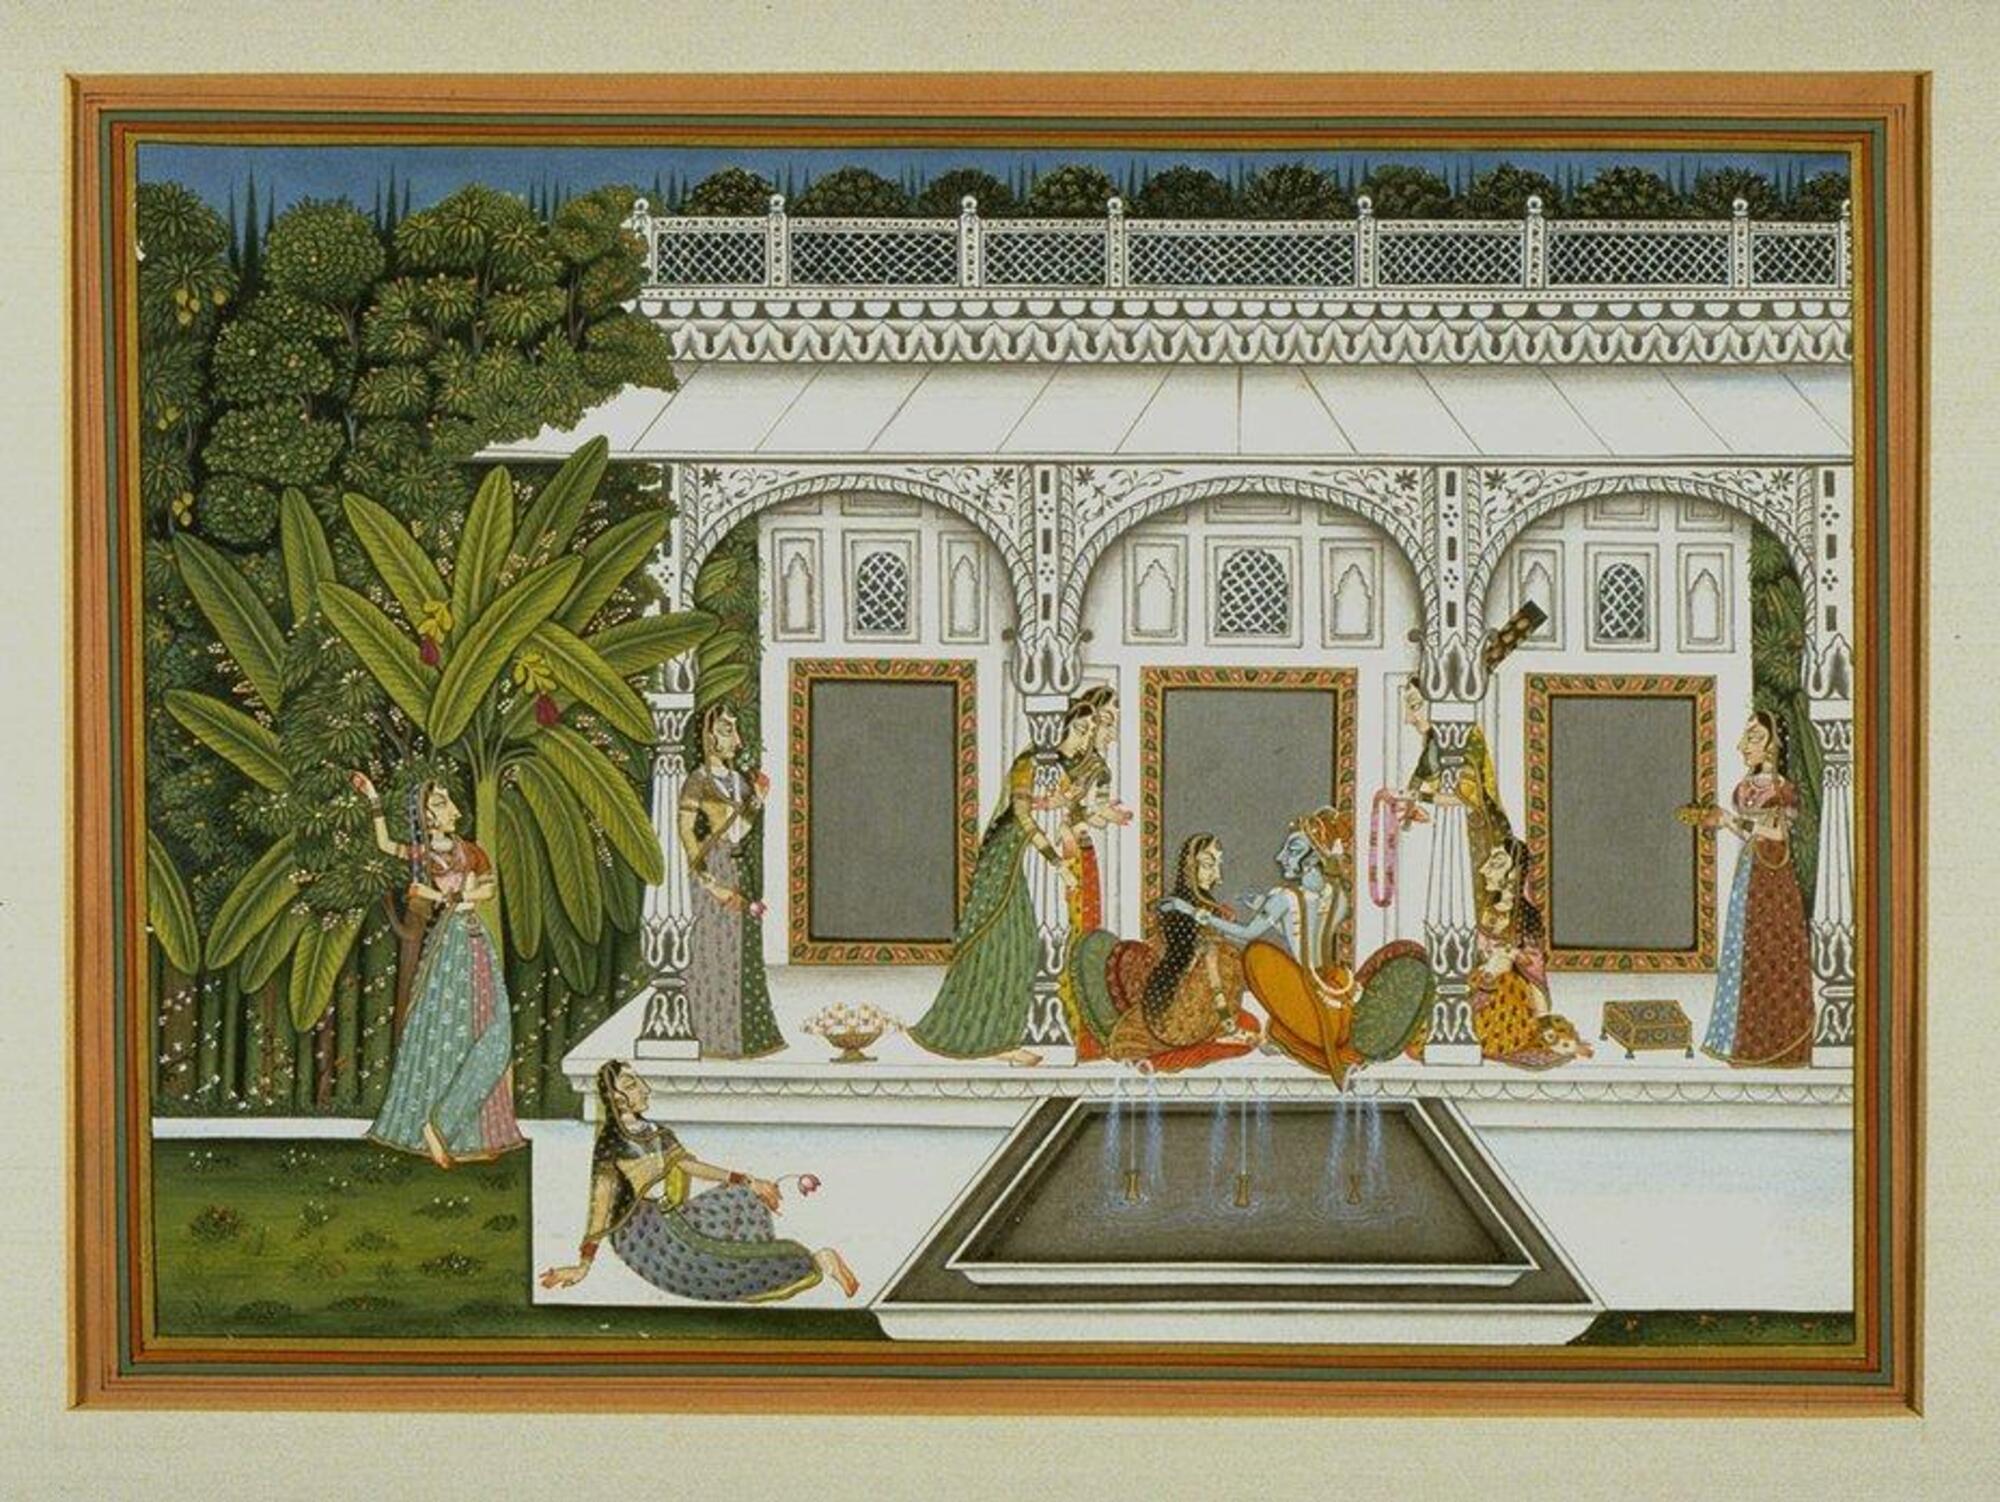 In this contemporary miniature, Lord Krishna is shown embracing his lover Radha. A number of adoring attendants watch the scene gleefully. Some sit, others stand, some hold garlands, whereas others look on in contemplation. A pool and fountain are depicted in the foreground, and a white colored palace forms the backdrop of the scene. The setting seems to be an open-air garden or forest-like environment.